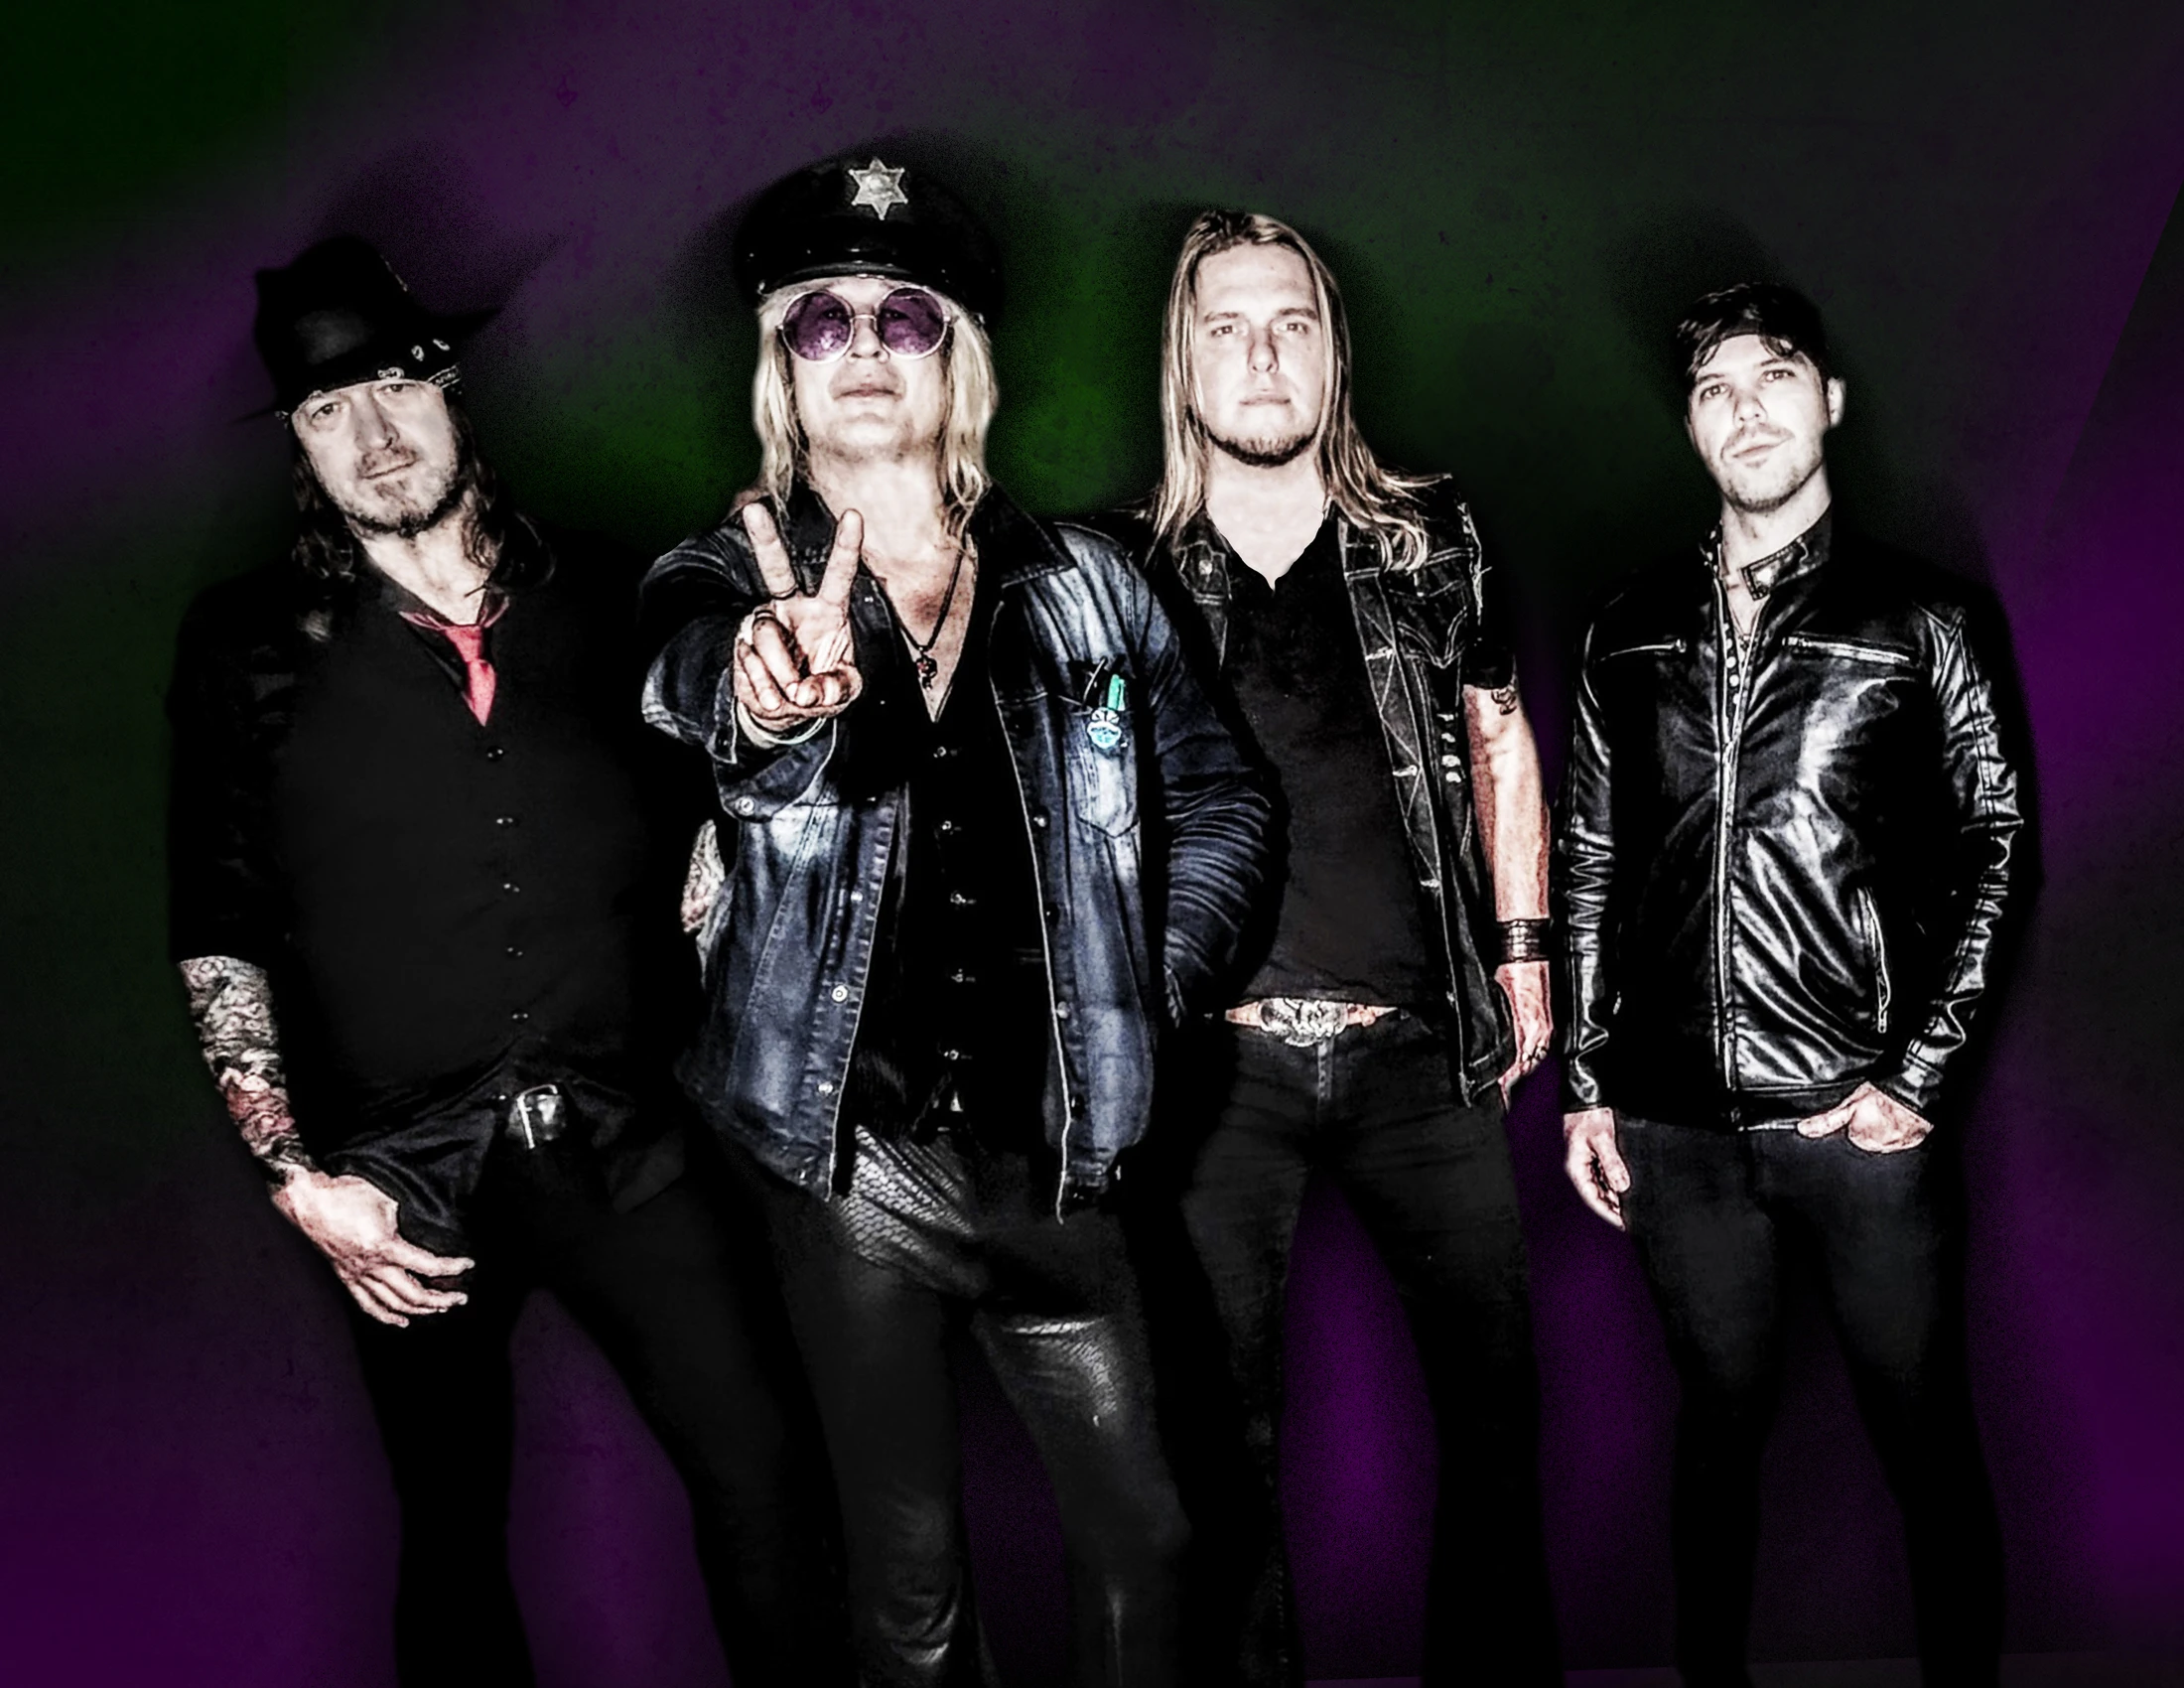 Image of the rock band Enuff Z' Nuff standing together with dark purple and green background. Lead singer Chip Z'Nuff with hand up in a peace sign.